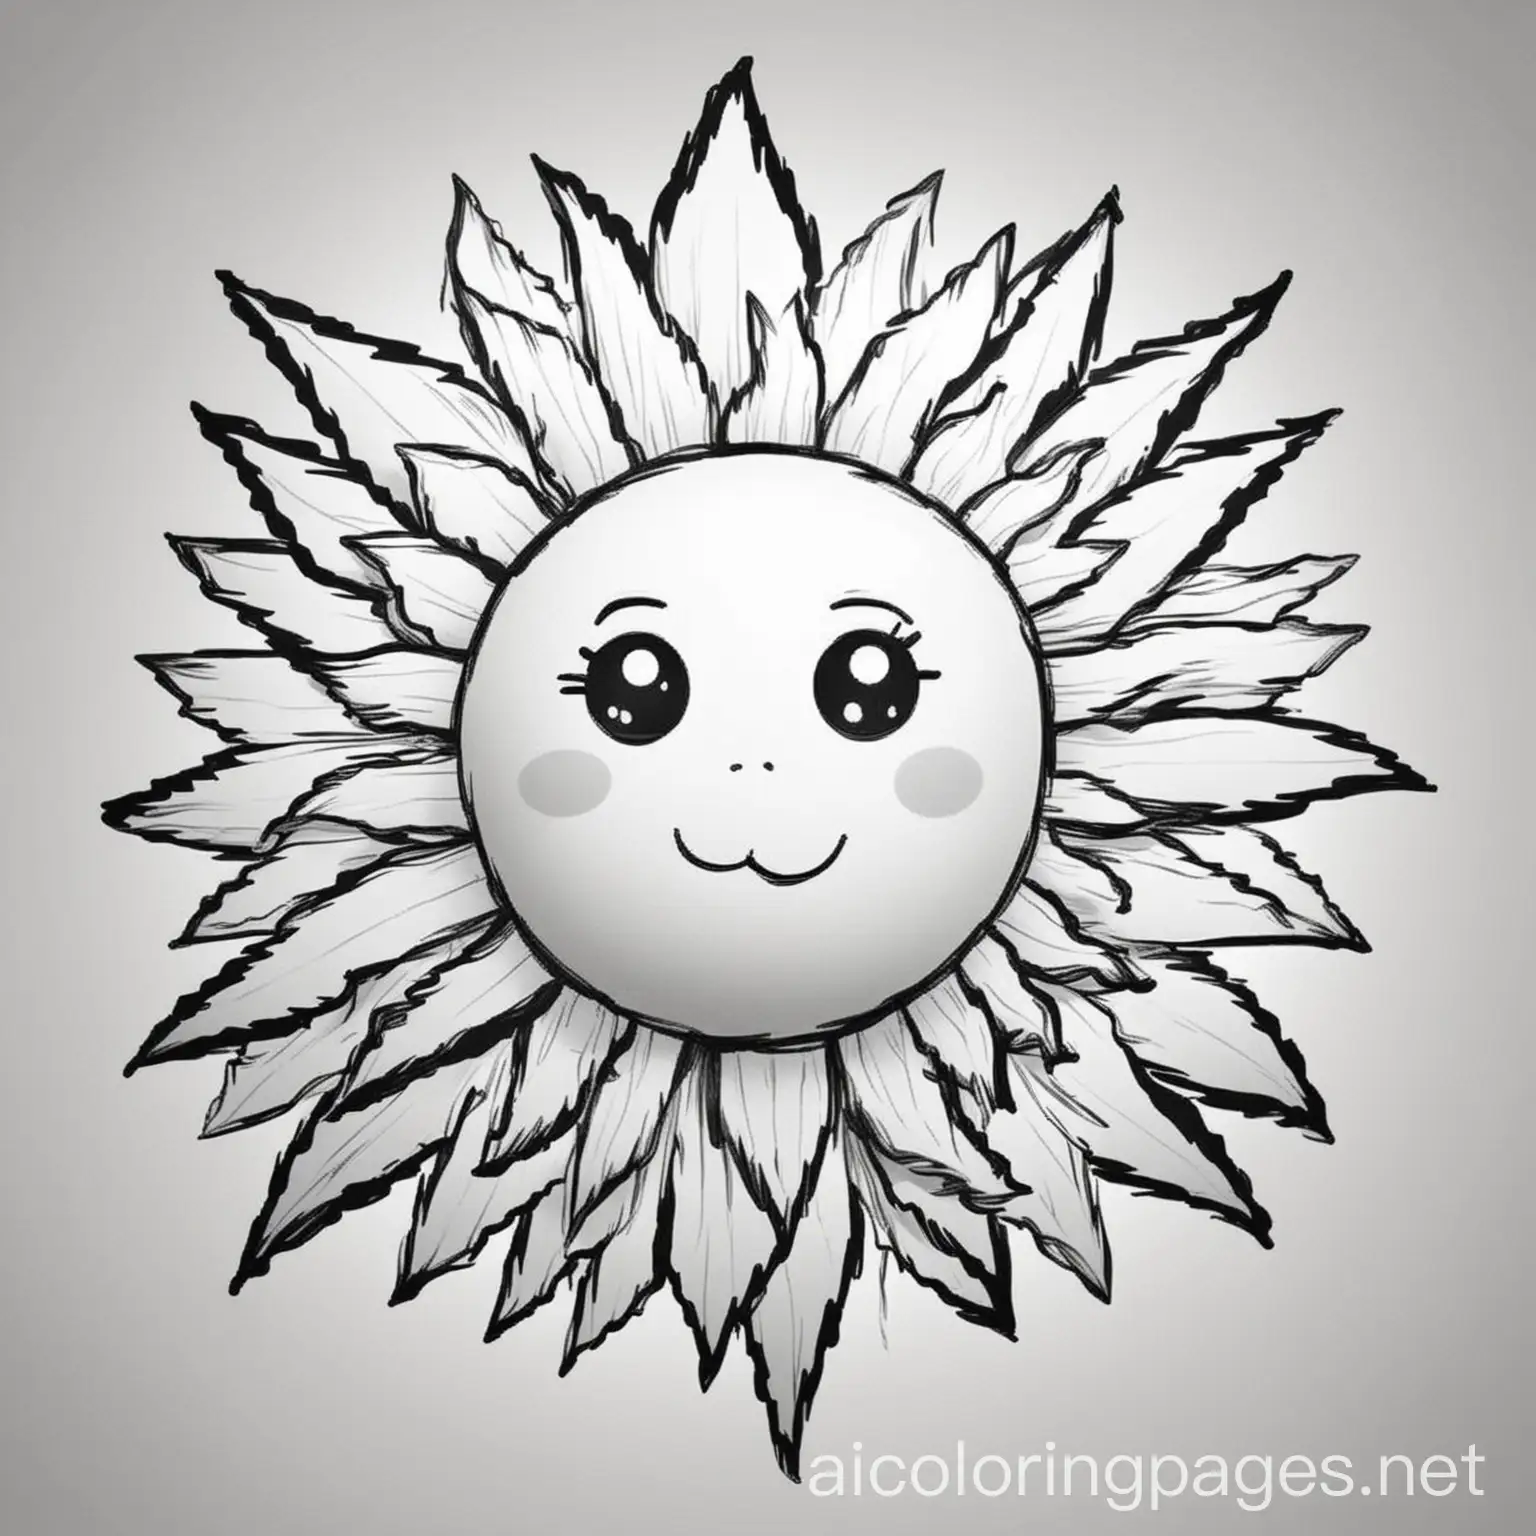 Simple-Cartoon-Sun-Coloring-Page-with-Ample-White-Space